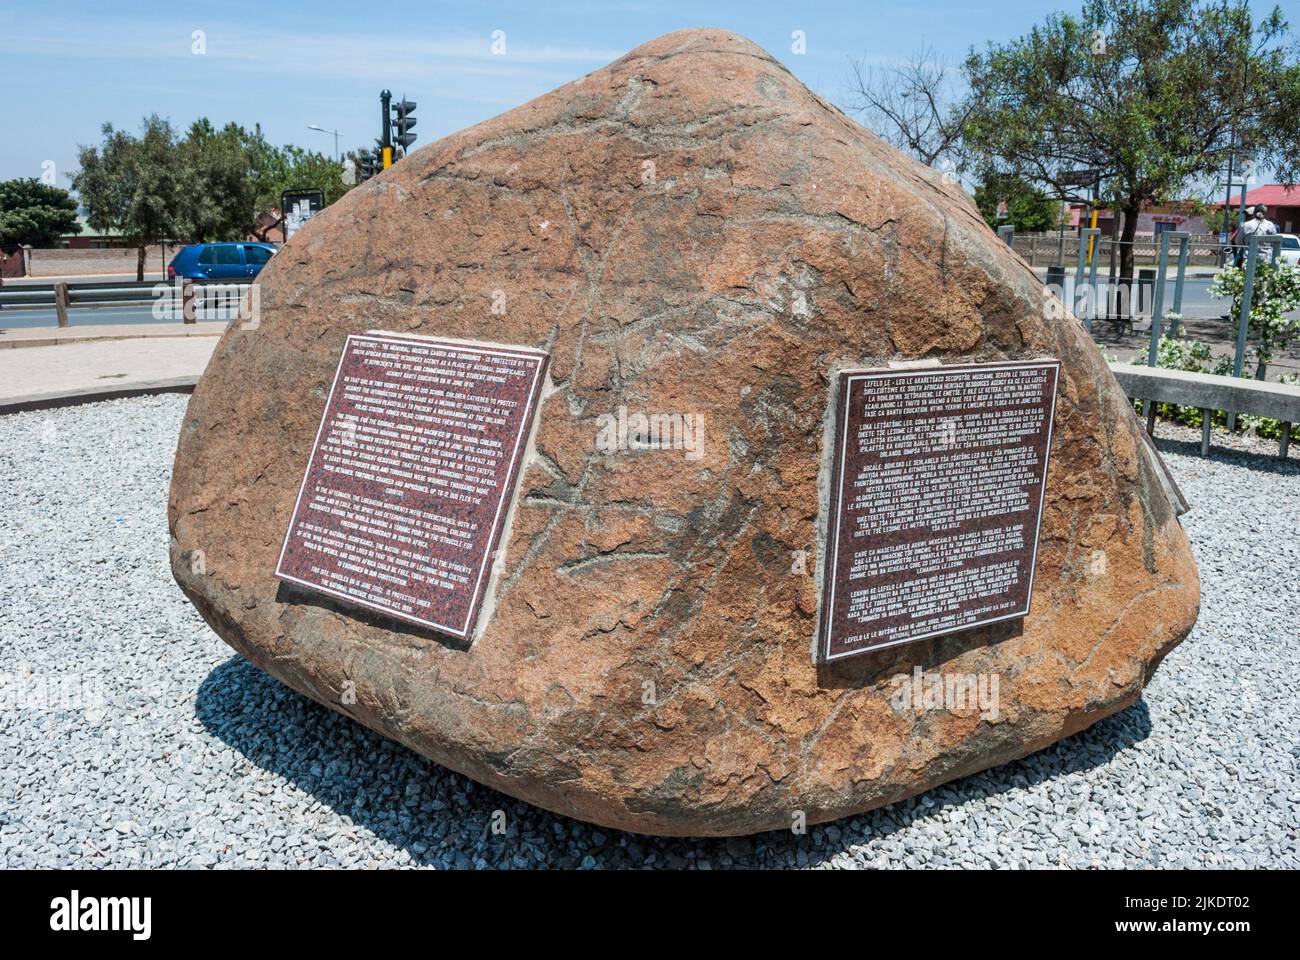 Information plaques. Hector Pieterson Memorial, 8288 Khumalo Street, Orlando West (Soweto). Johannesburg, South Africa, Africa. Stock Photo